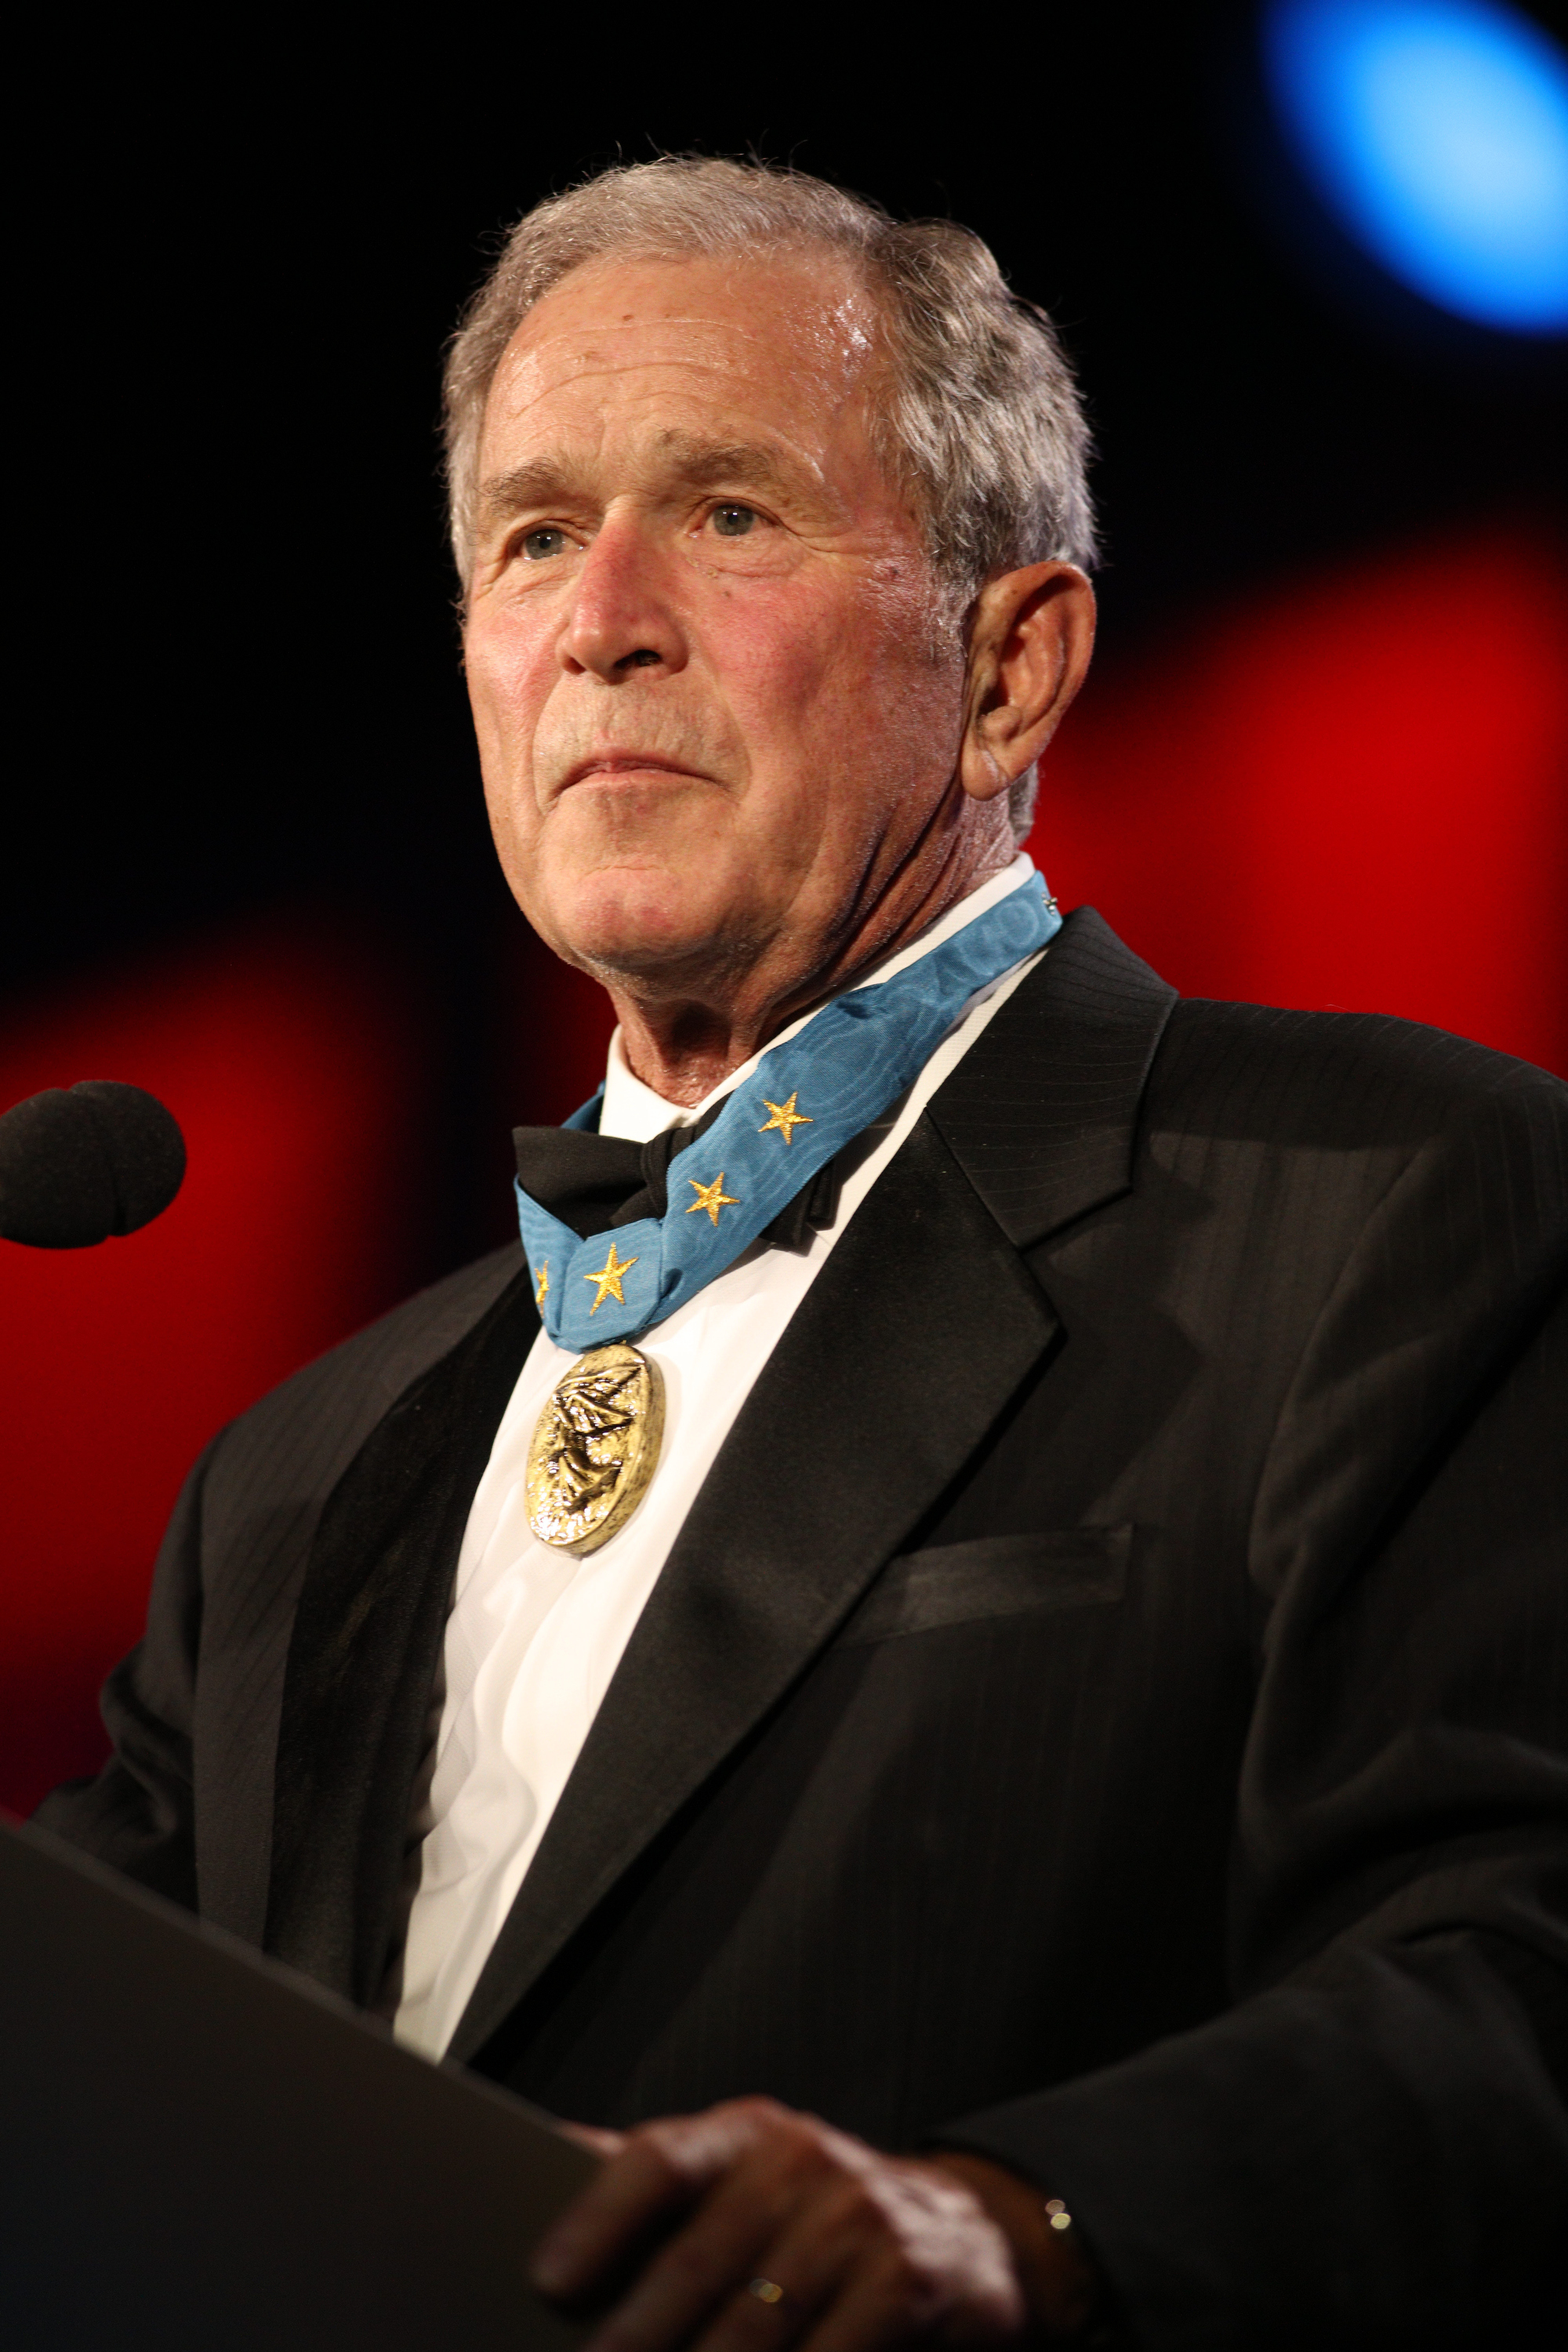 George W. Bush takes the stage at the 2015 Starkey Hearing Foundation So The World May Hear Gala in St. Paul, Minn., at the St. Paul RiverCentre on July 26, 2015.